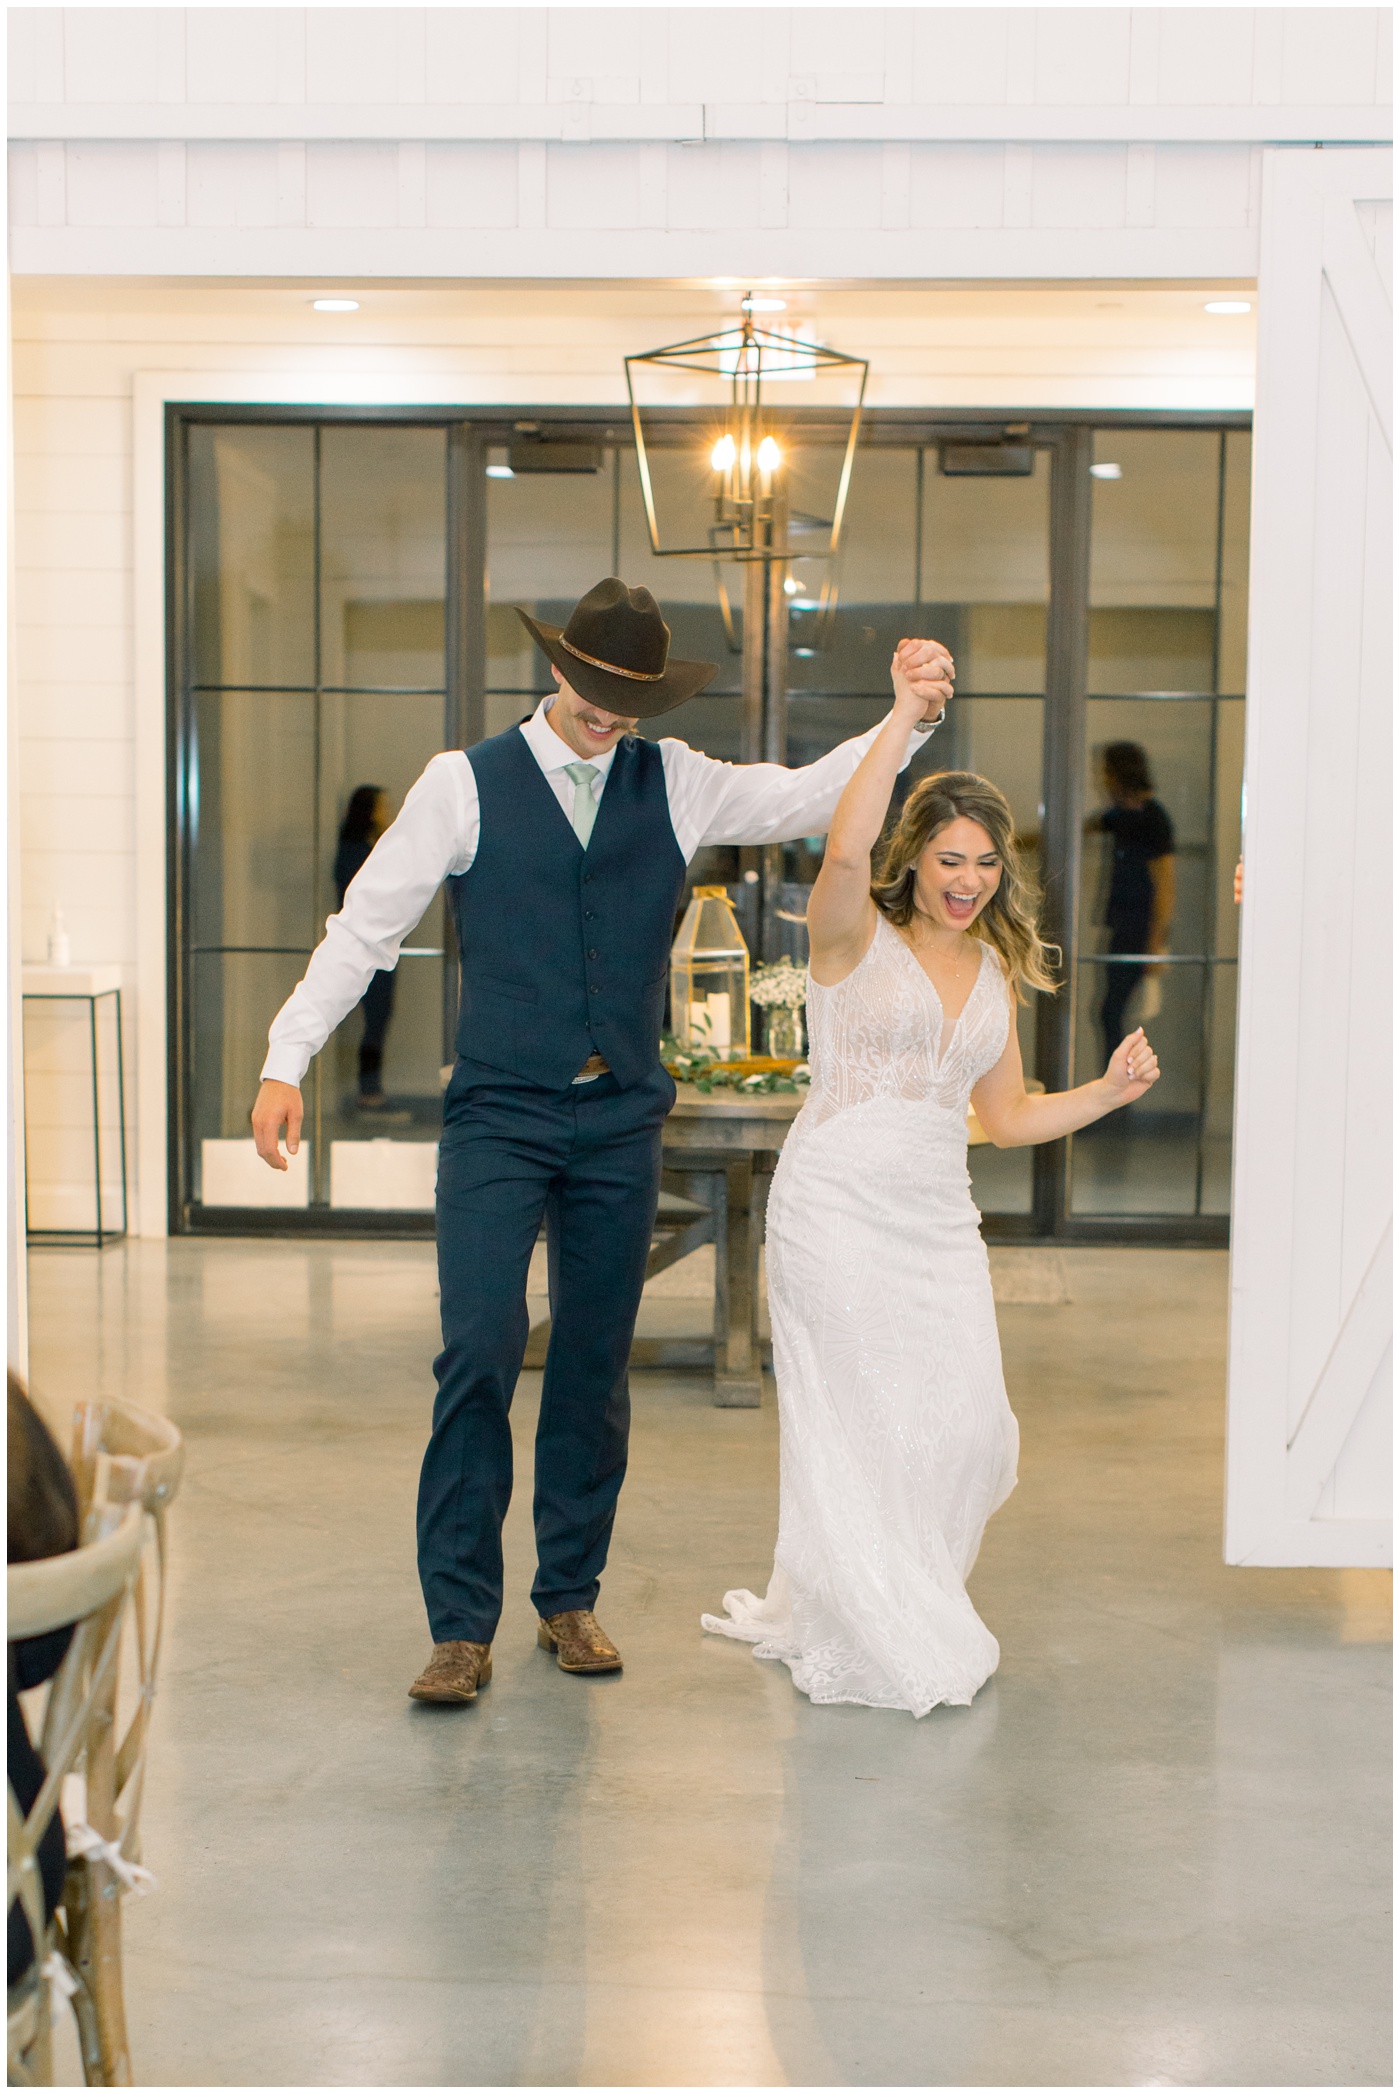 Texas farmhouse wedding | the bride and groom celebrate during the grand entrance 